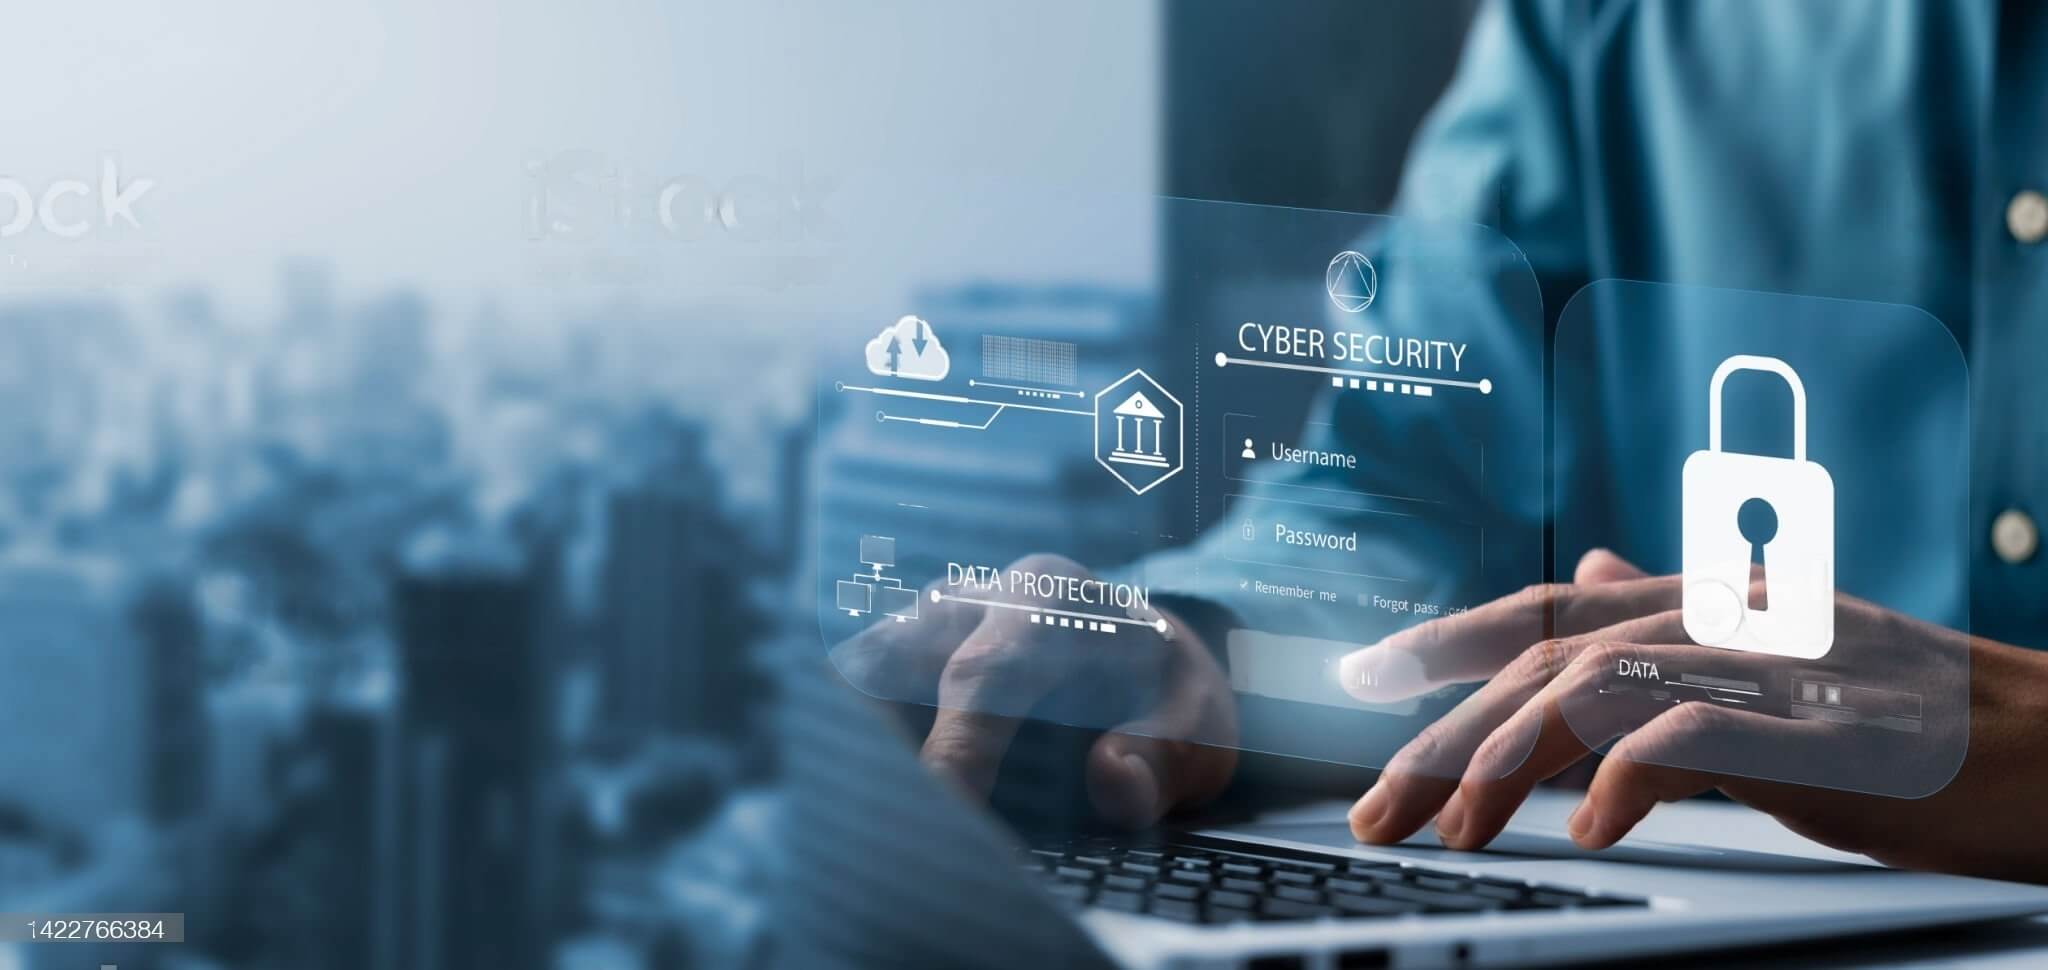 Cybersecurity and Data Protection: Creating Value in a World of Risks Anticipation